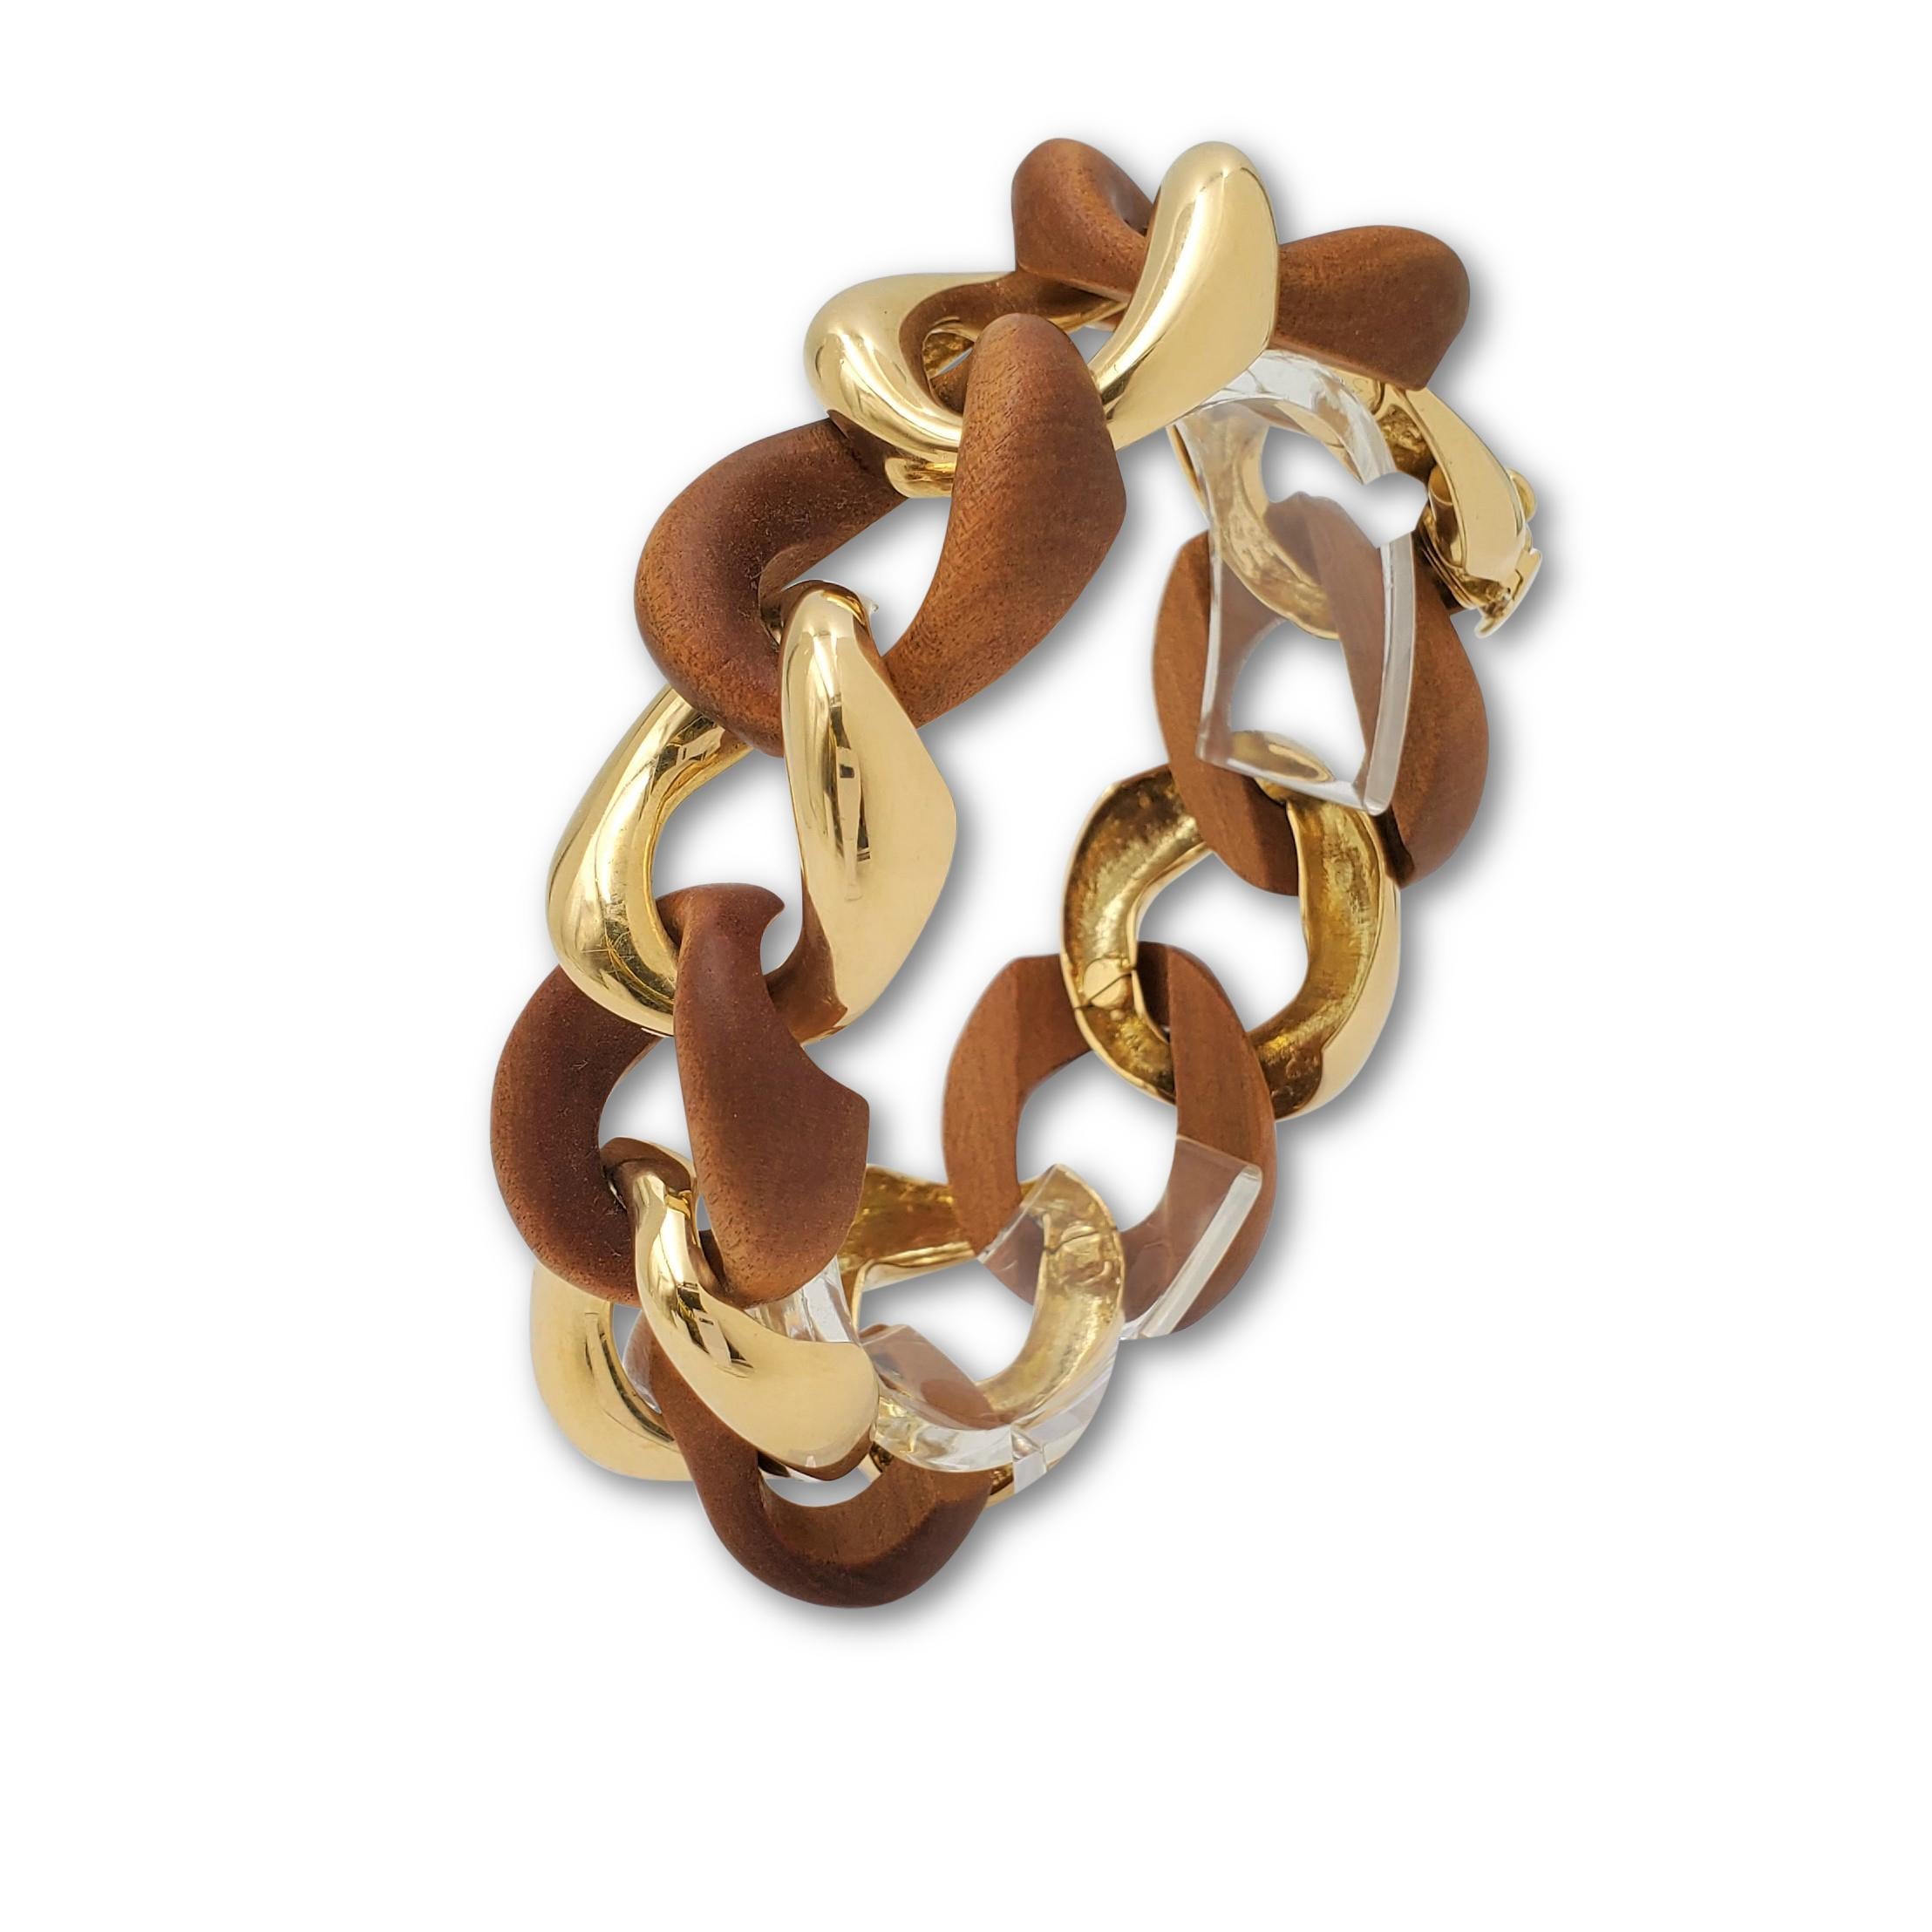 Authentic classic Seaman Schepps bracelet features alternating carved wood and 18 karat yellow gold curb links. Signed Seaman Schepps, 750, with serial number and hallmarks. The bracelet measures 7 1/2 inches in length. Not presented with the